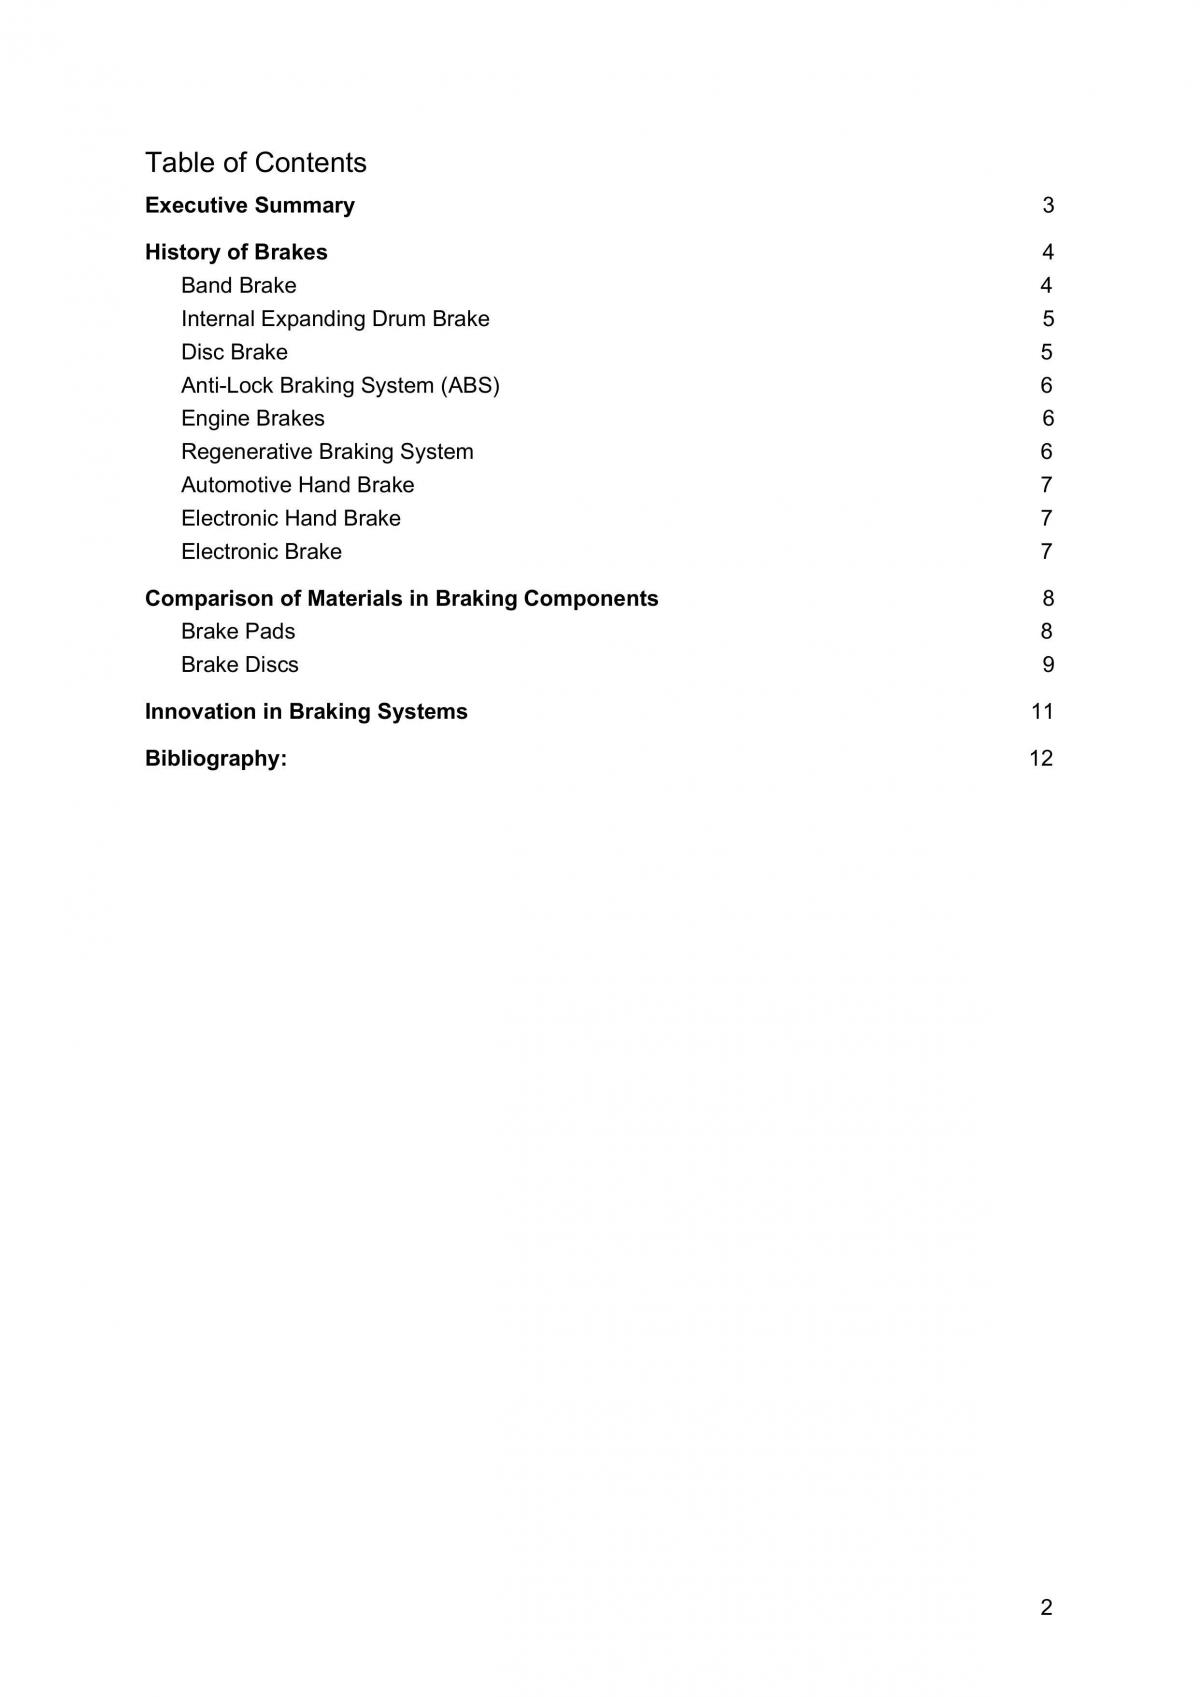 Engineering Report on Braking Systems - Page 2